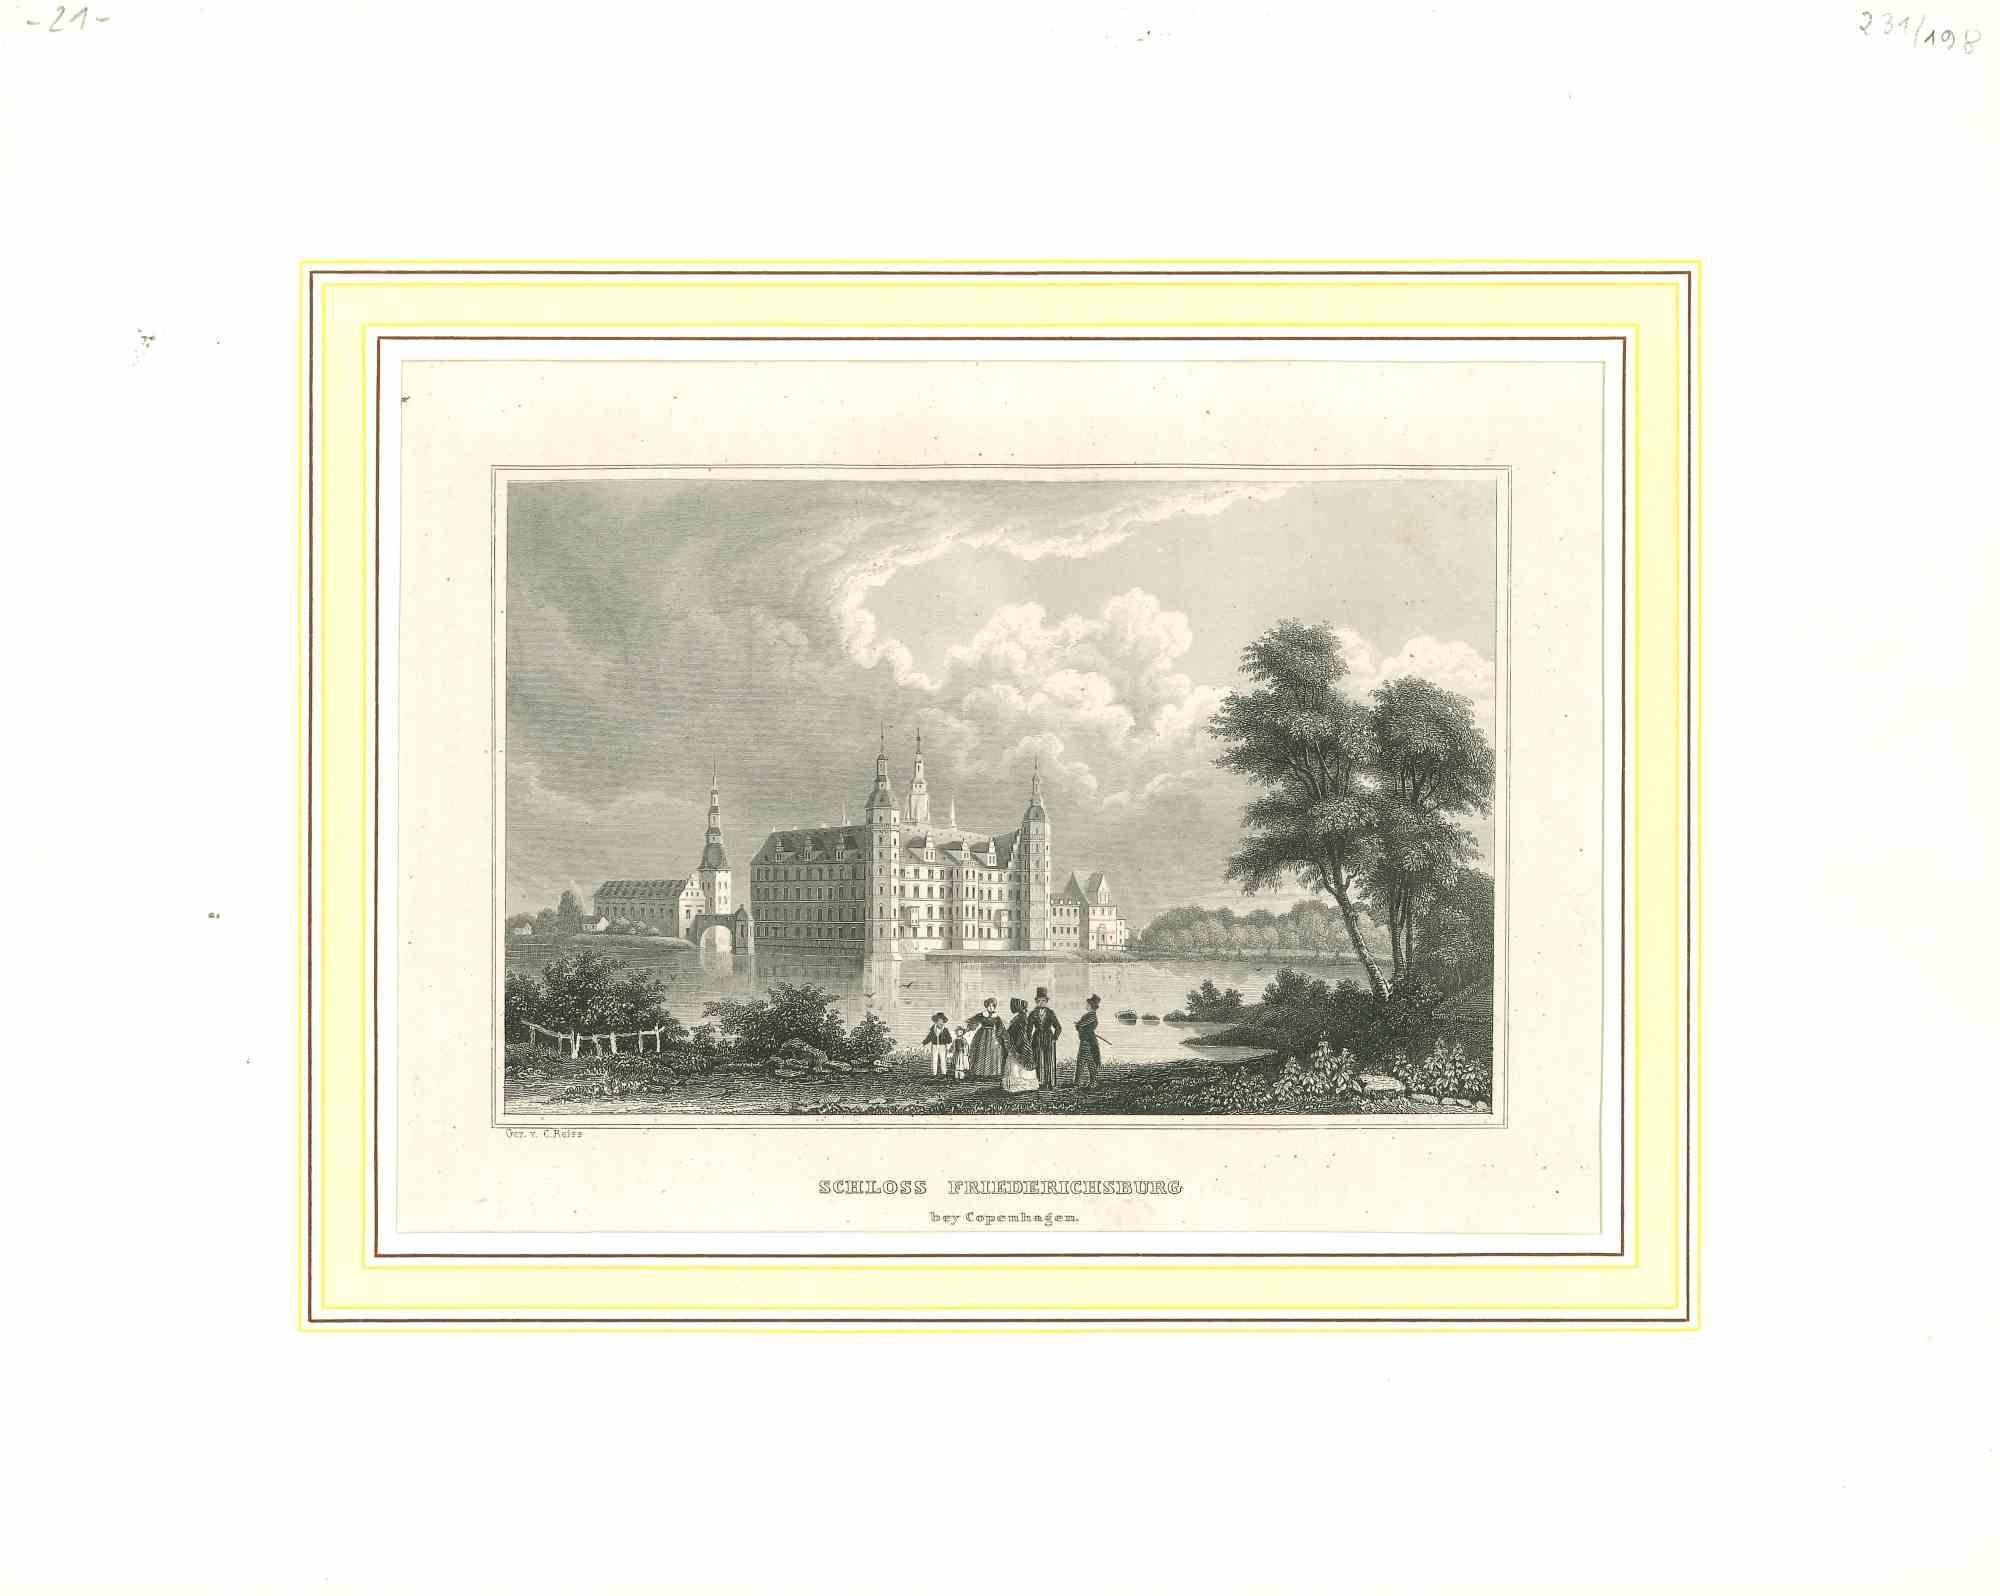  Ancient View of Schloss Friederichsburg - Lithograph on Paper - Early 1800